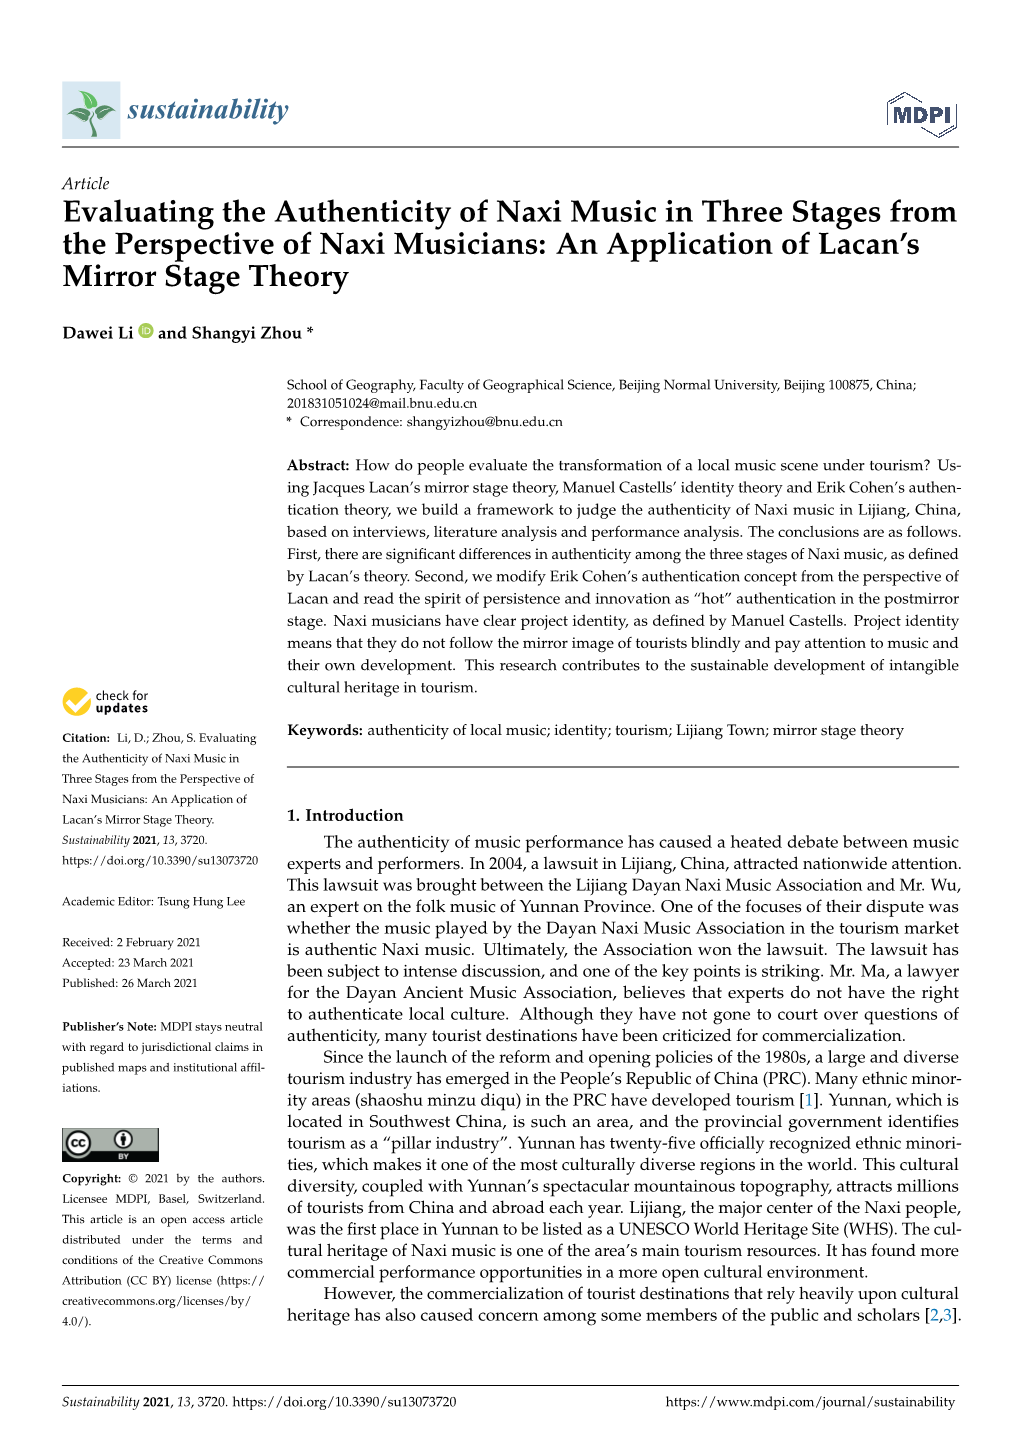 Evaluating the Authenticity of Naxi Music in Three Stages from the Perspective of Naxi Musicians: an Application of Lacan's Mi